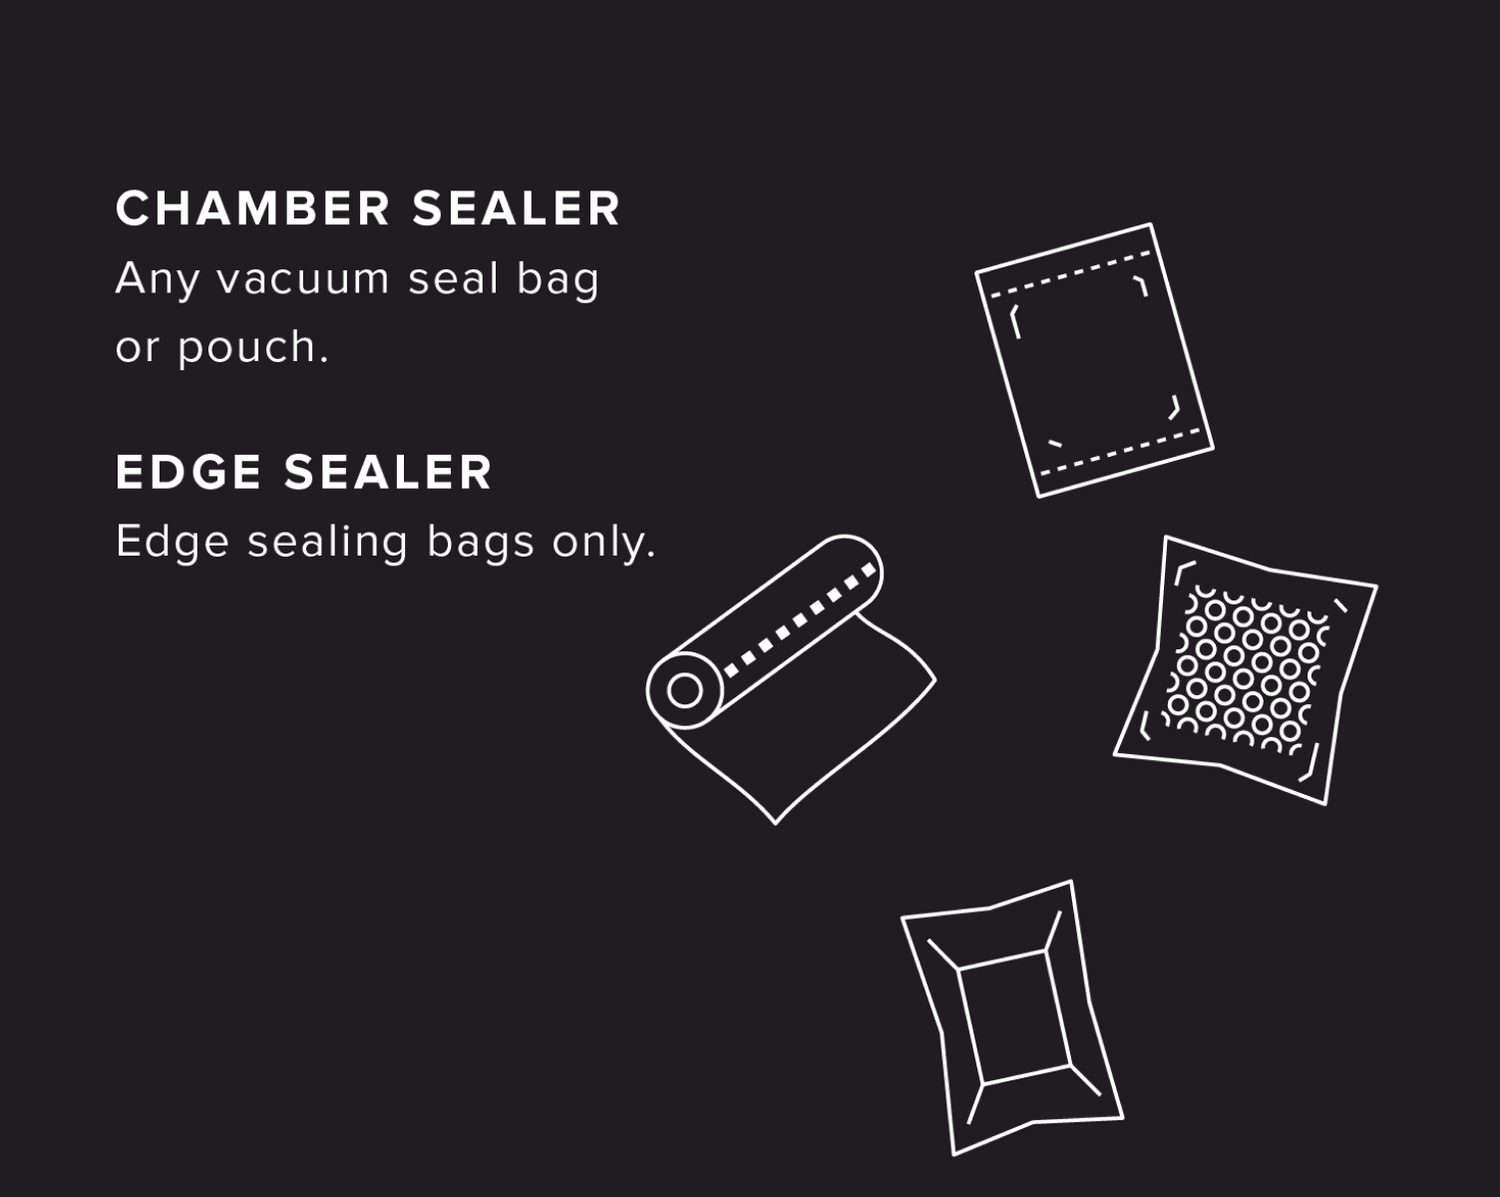 chamber pouches versus edge sealer bags